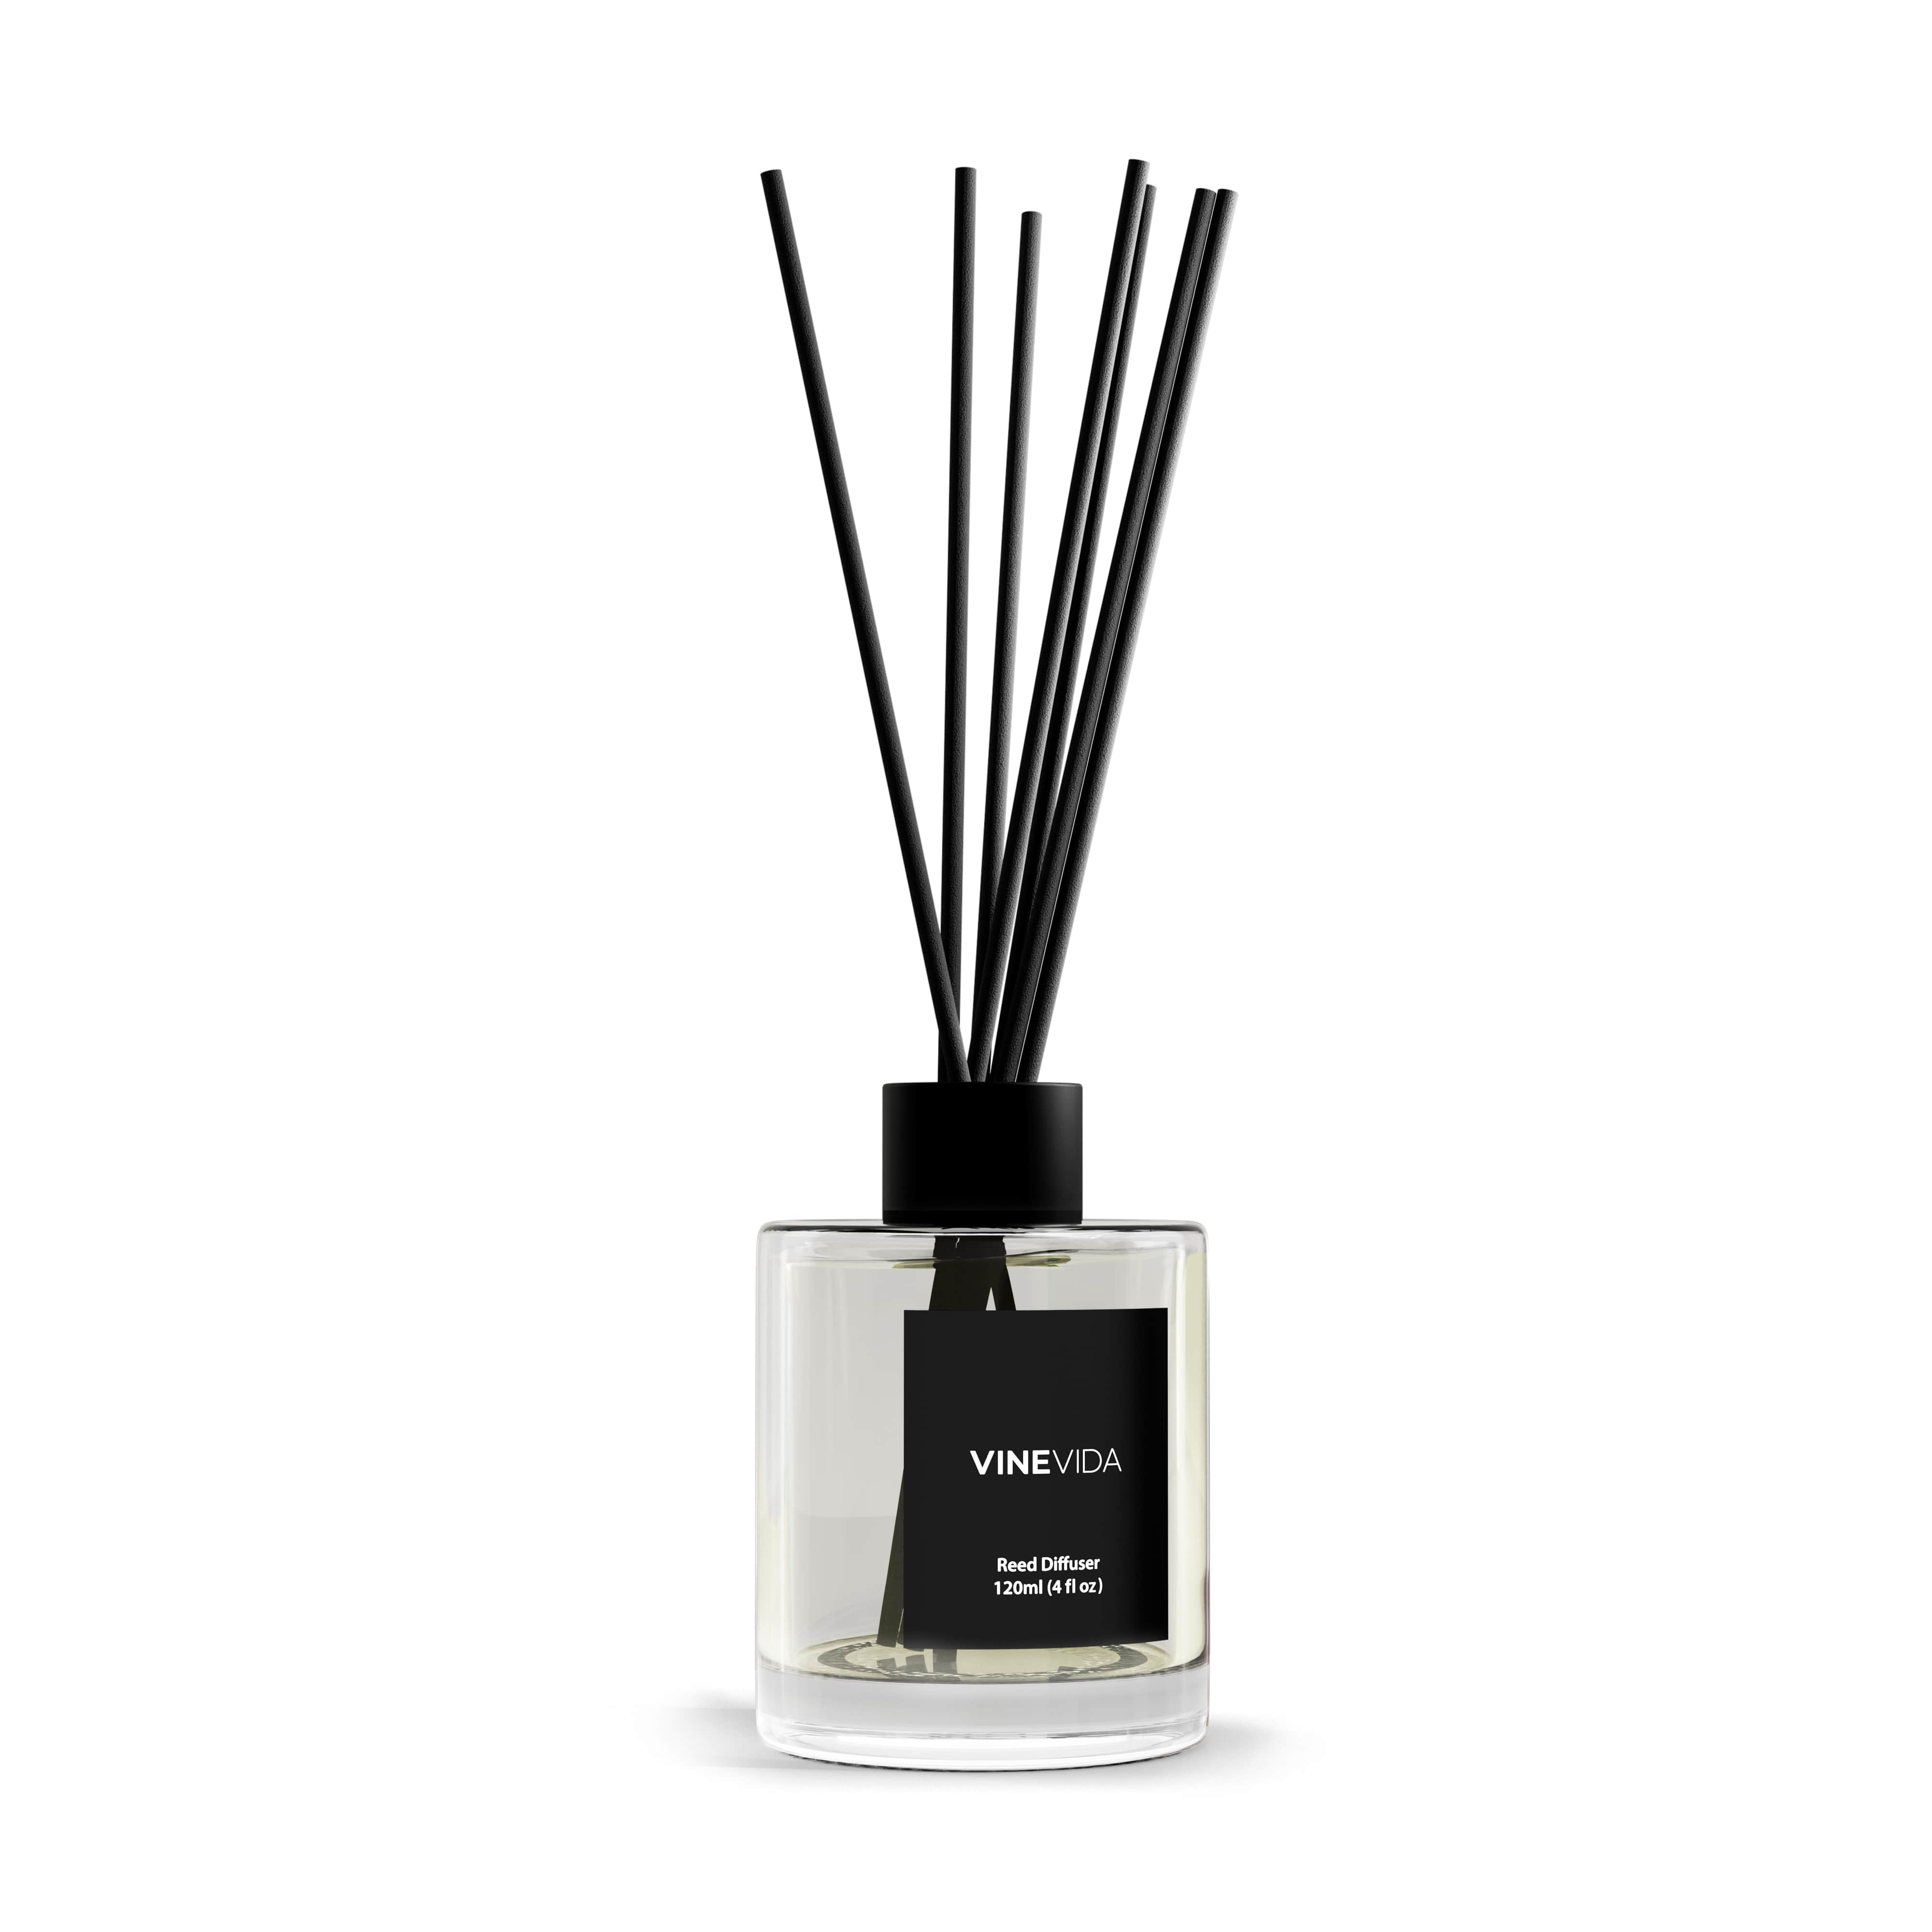 NO. 1301 Reed Diffuser - Inspired by: Bergamote 22 by Le Labo